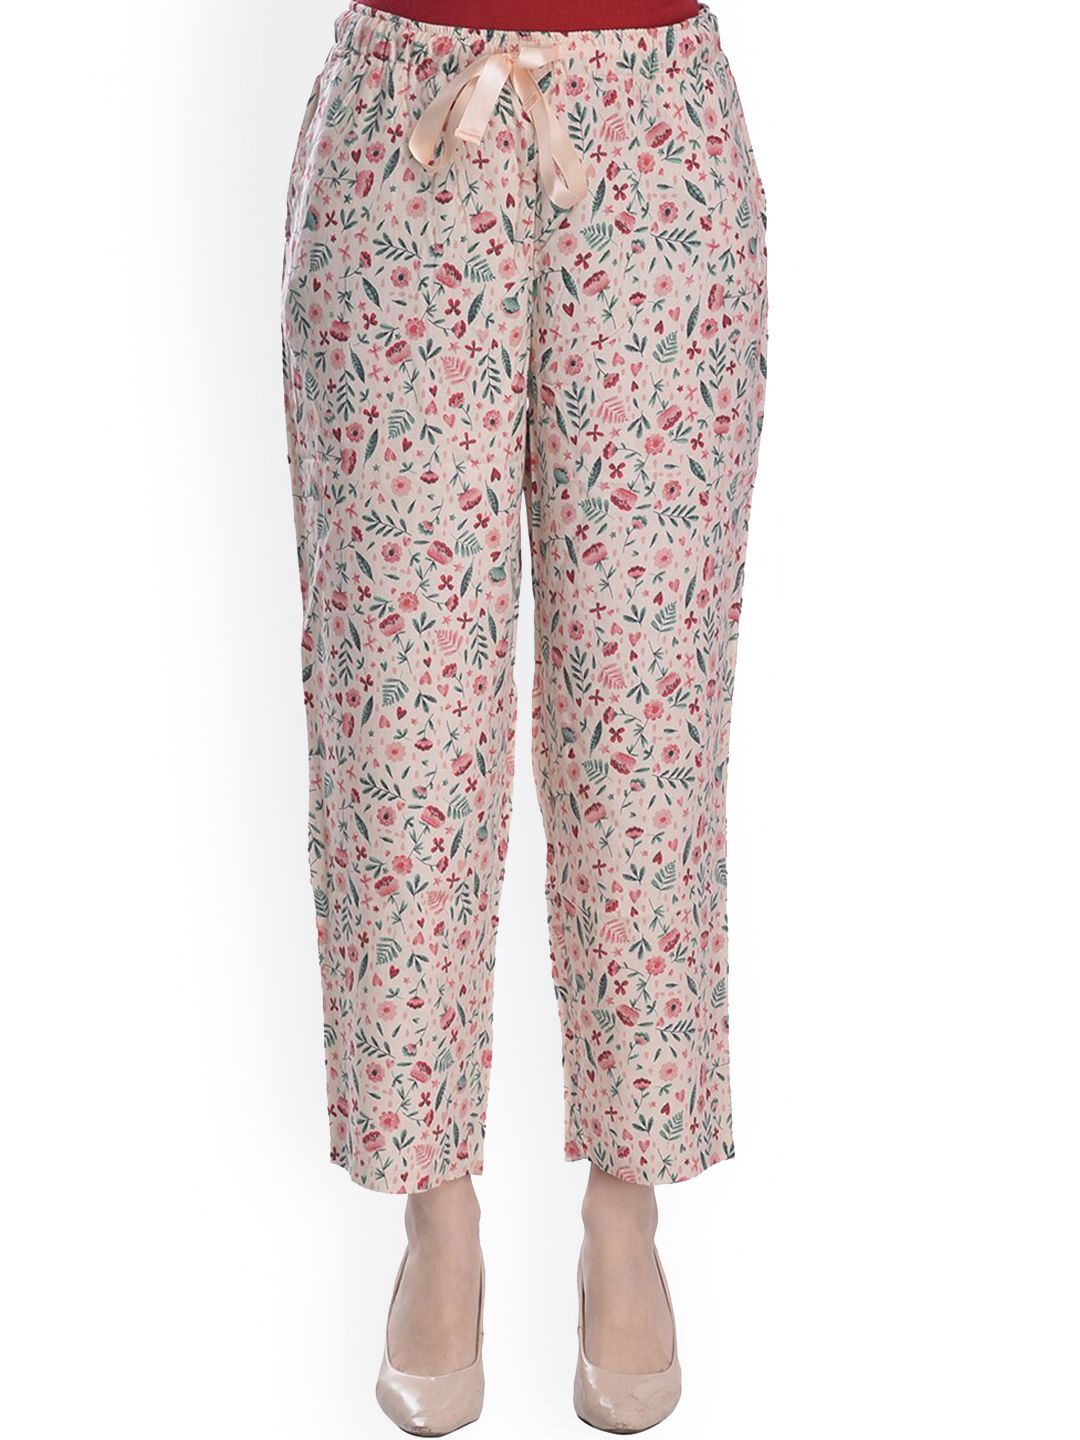 Style SHOES Women Pink Floral Printed Lounge Pants Price in India